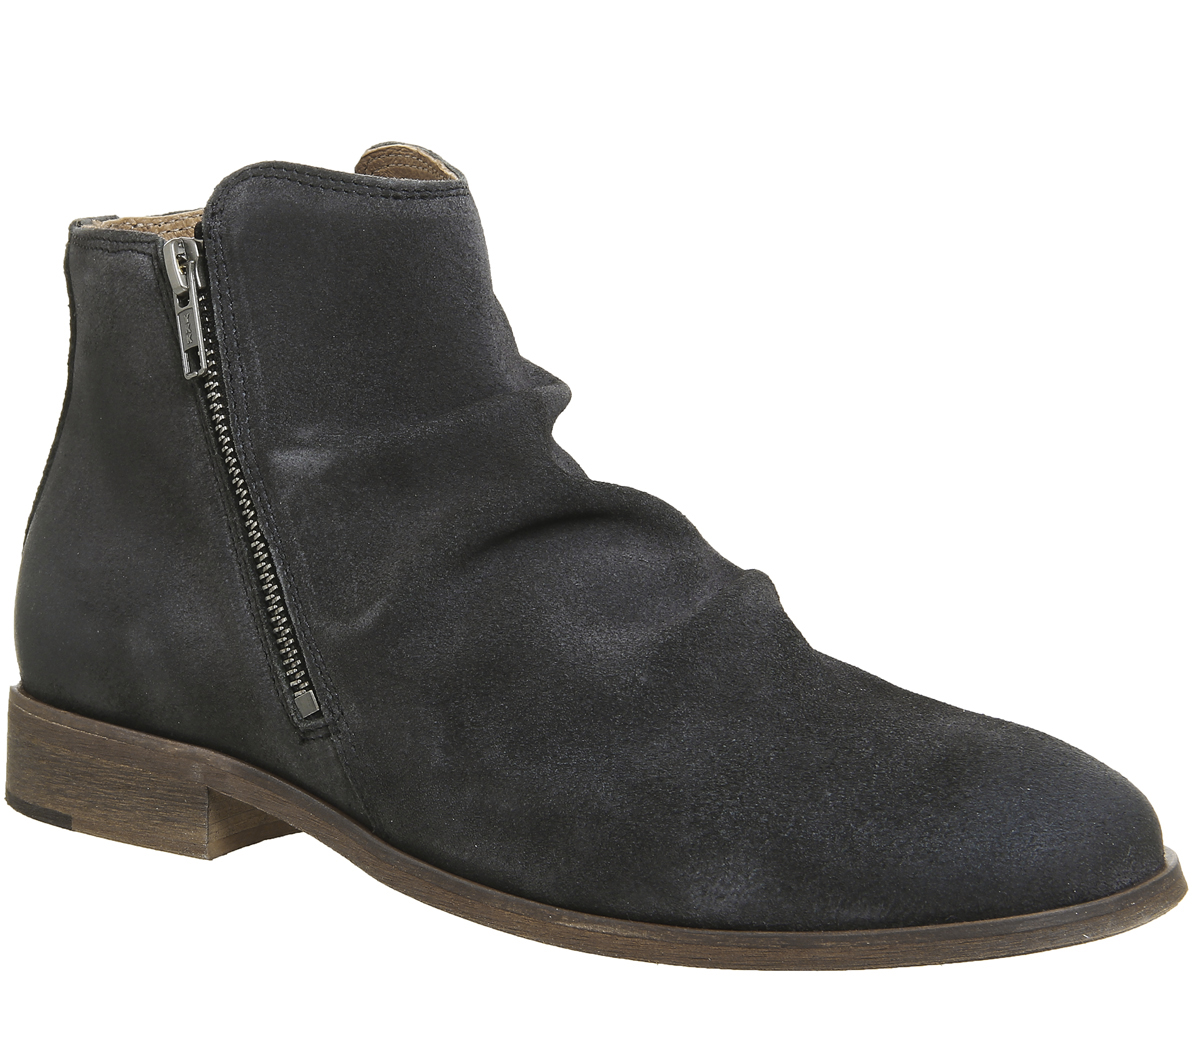 Criticism Main street density Ask the Missus Guilty Zip Boots Charcoal Grey - Men's Boots